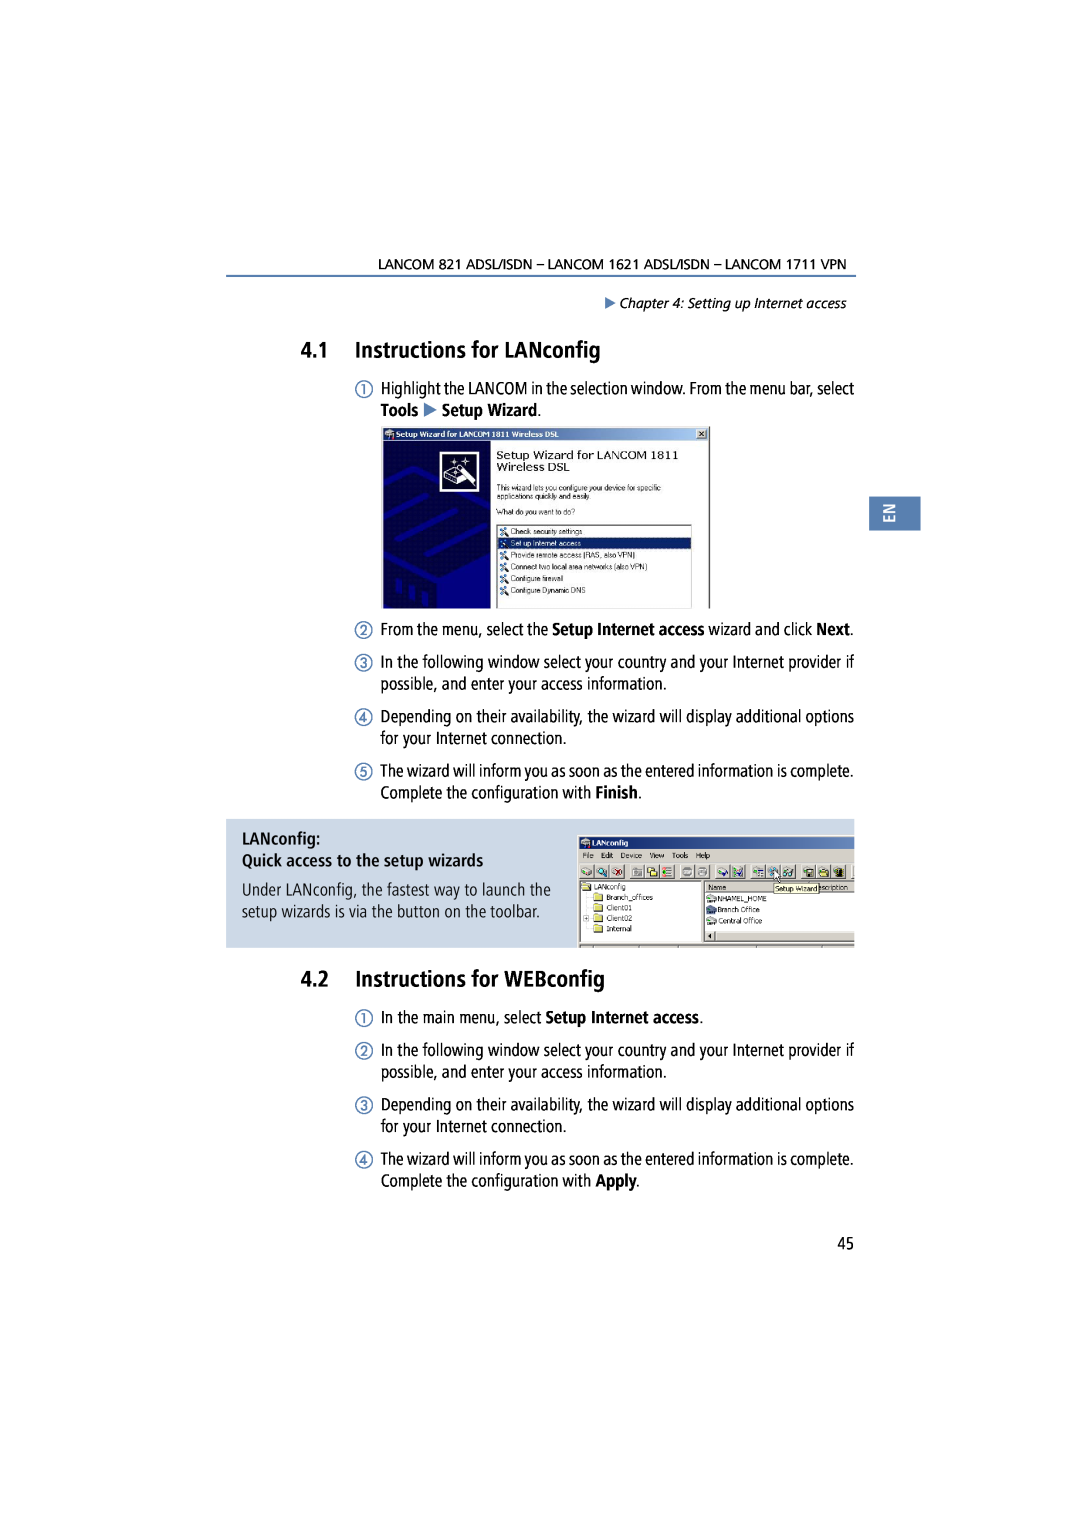 Lancom Systems 821, 1711, 1621 manual Instructions for LANconfig, Instructions for WEBconfig, Tools Setup Wizard 